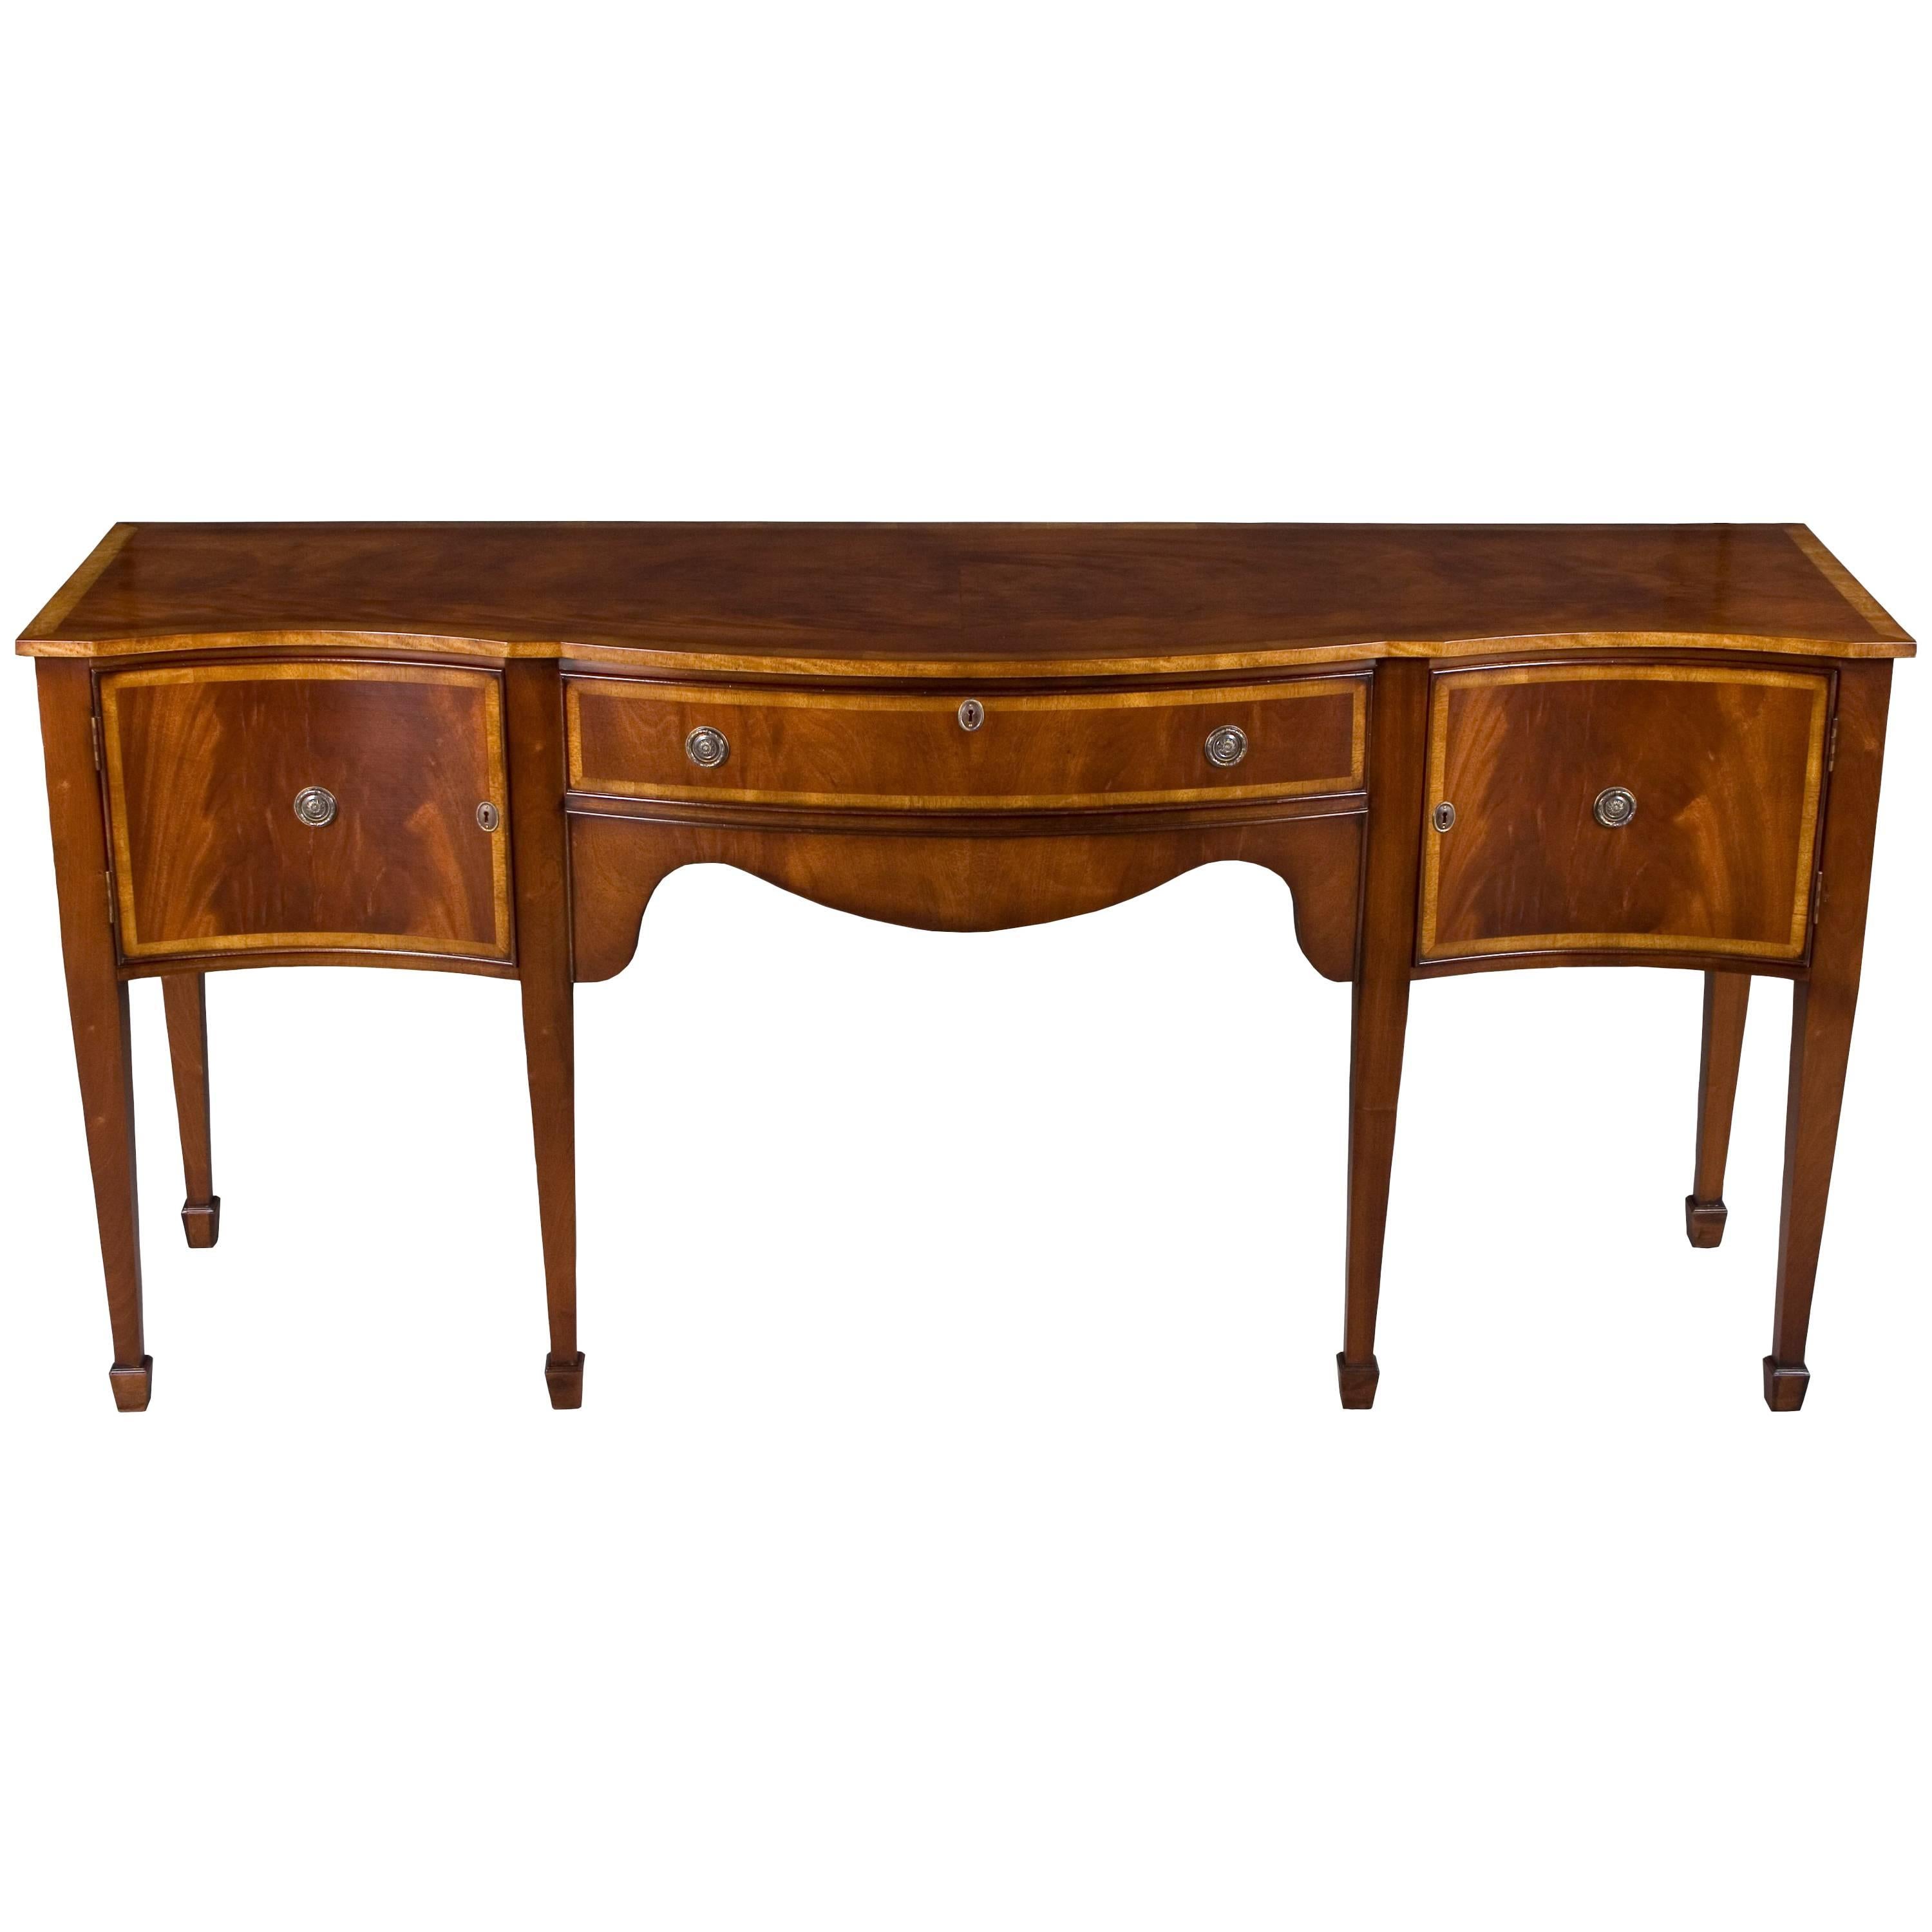 Reproduction Long Serpentine Front Inlaid Mahogany Sideboard For Sale